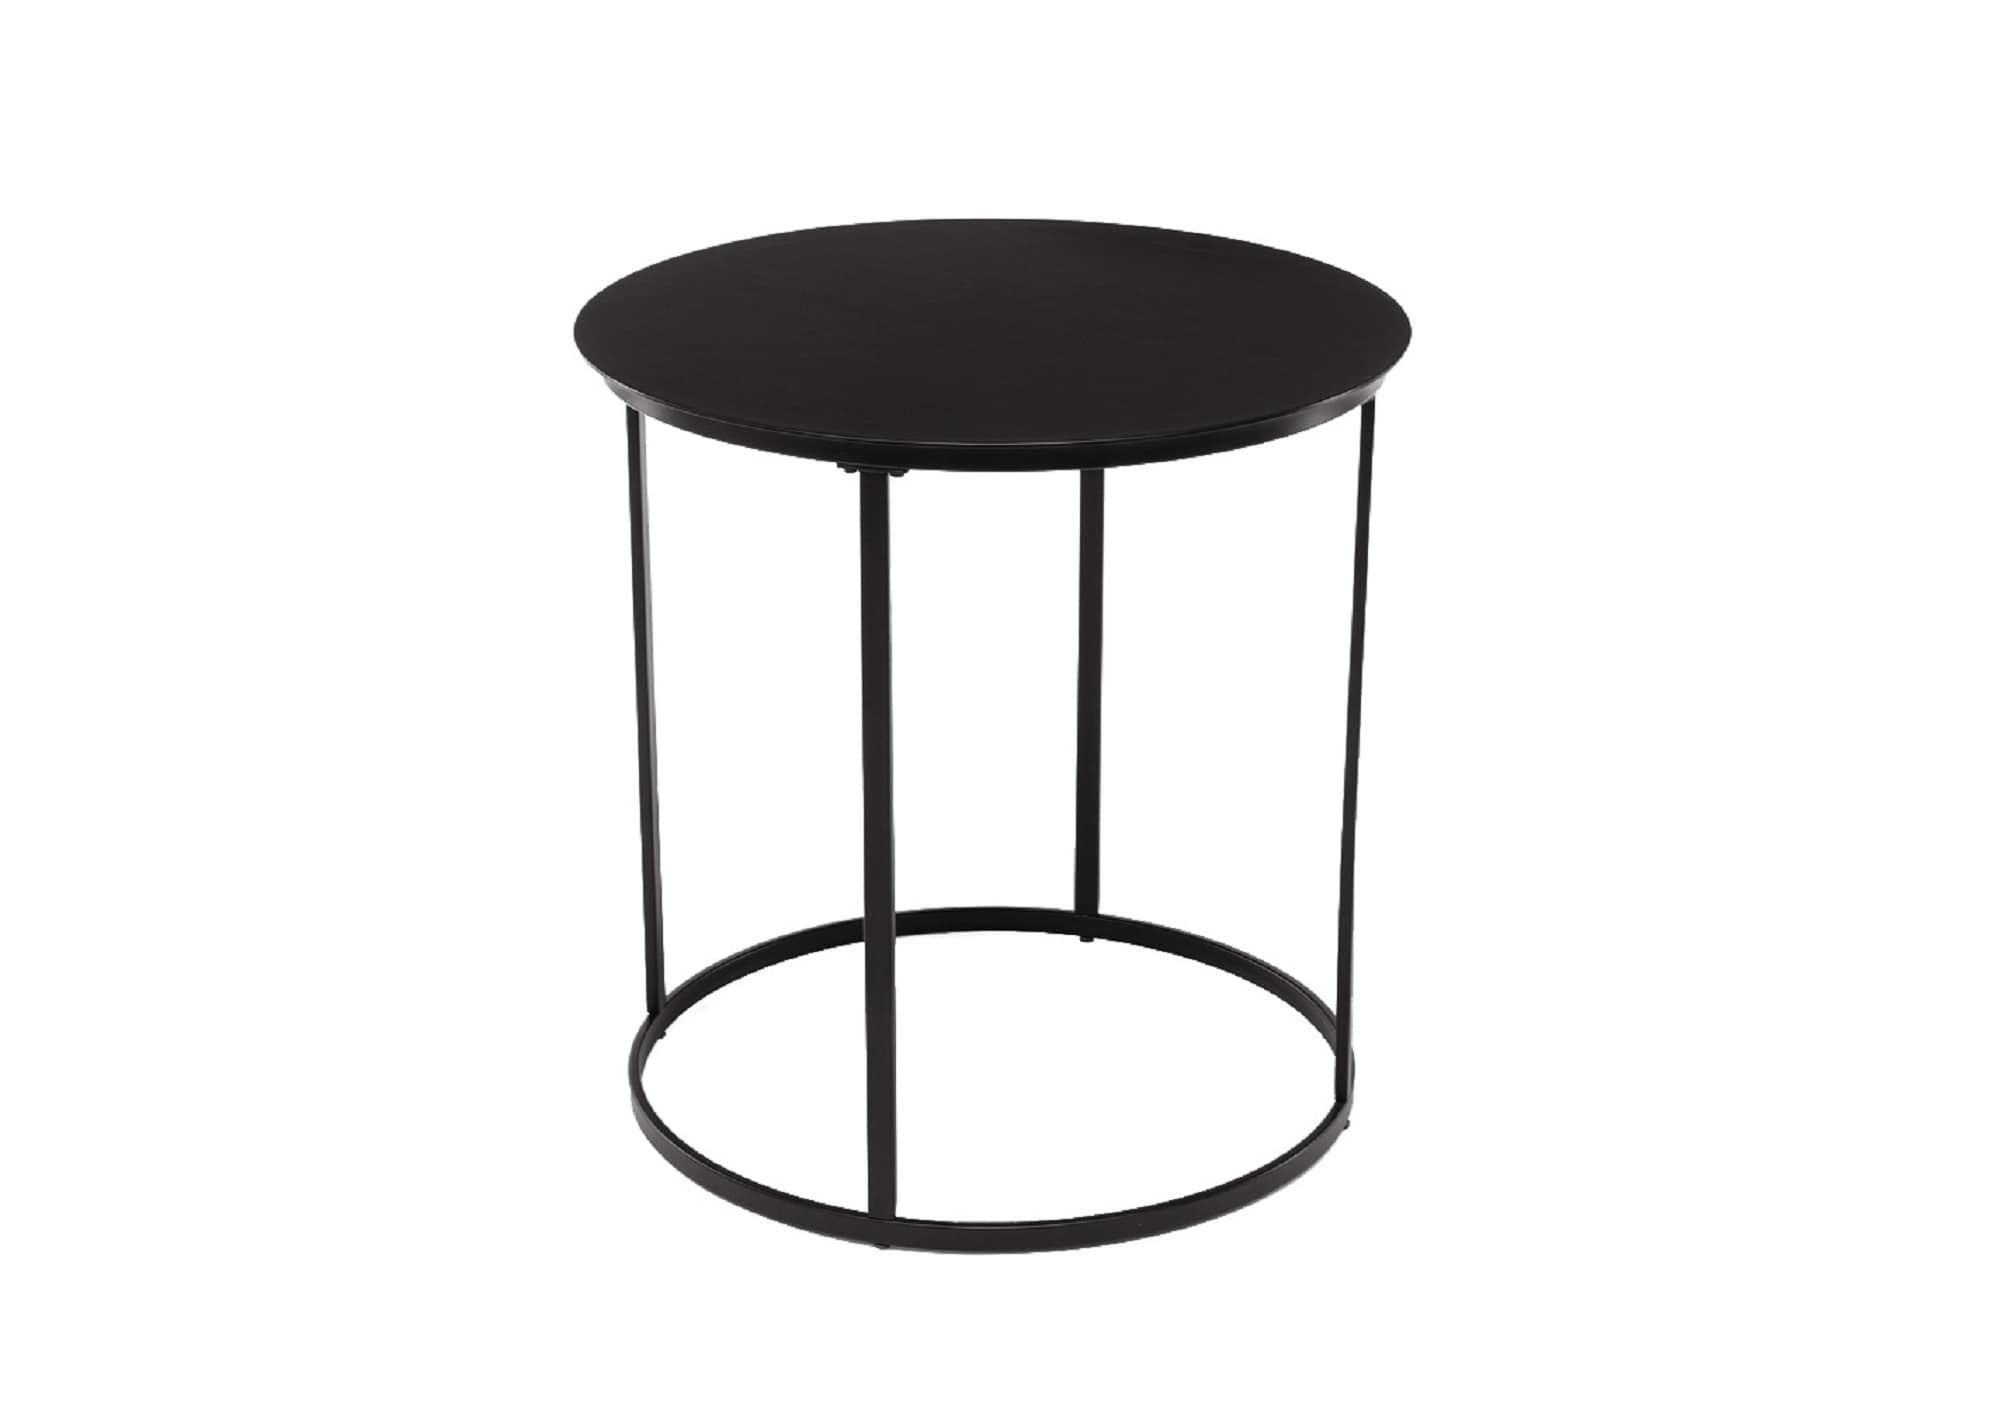 Landon Accent & Coffee Tables at Lowes.com